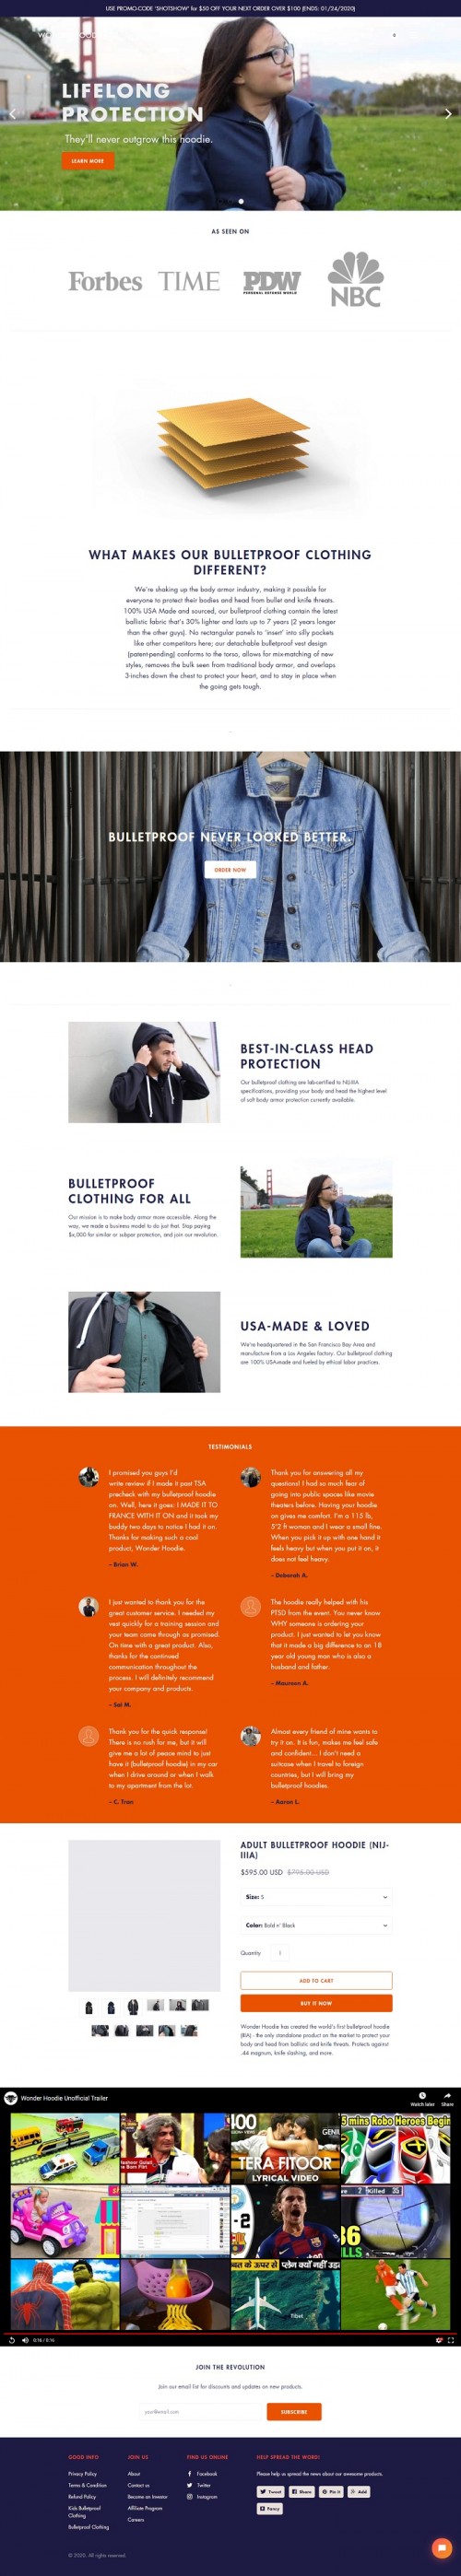 Our bulletproof clothing includes affordable bulletproof vests, Bulletproof Shirt, Civilian bulletproof clothing, bulletproof backpacks, and bulletproof hoodies for men, women and children. Bulletproof clothing. Wonder Hoodie was created out of a personal need to protect loved ones. After a neighborhood shooting, our founder searched online for protective clothing for her mom and little brother. Unfortunately, she was met with few bulletproof clothing options designed for them, and prices that soared into the thousands of dollars. Our mission is to make body armor more accessible to all, and allow everyone to feel safe walking around their communities.

#wonderhoodie #premium #bulletproof #jacket #shirt #clothing #civilian #bodyarmor #vest #suit #headprotection #dogclothes #kevlarvest #miguelcaballero #USA

Find More Information:- https://wonderhoodie.com/